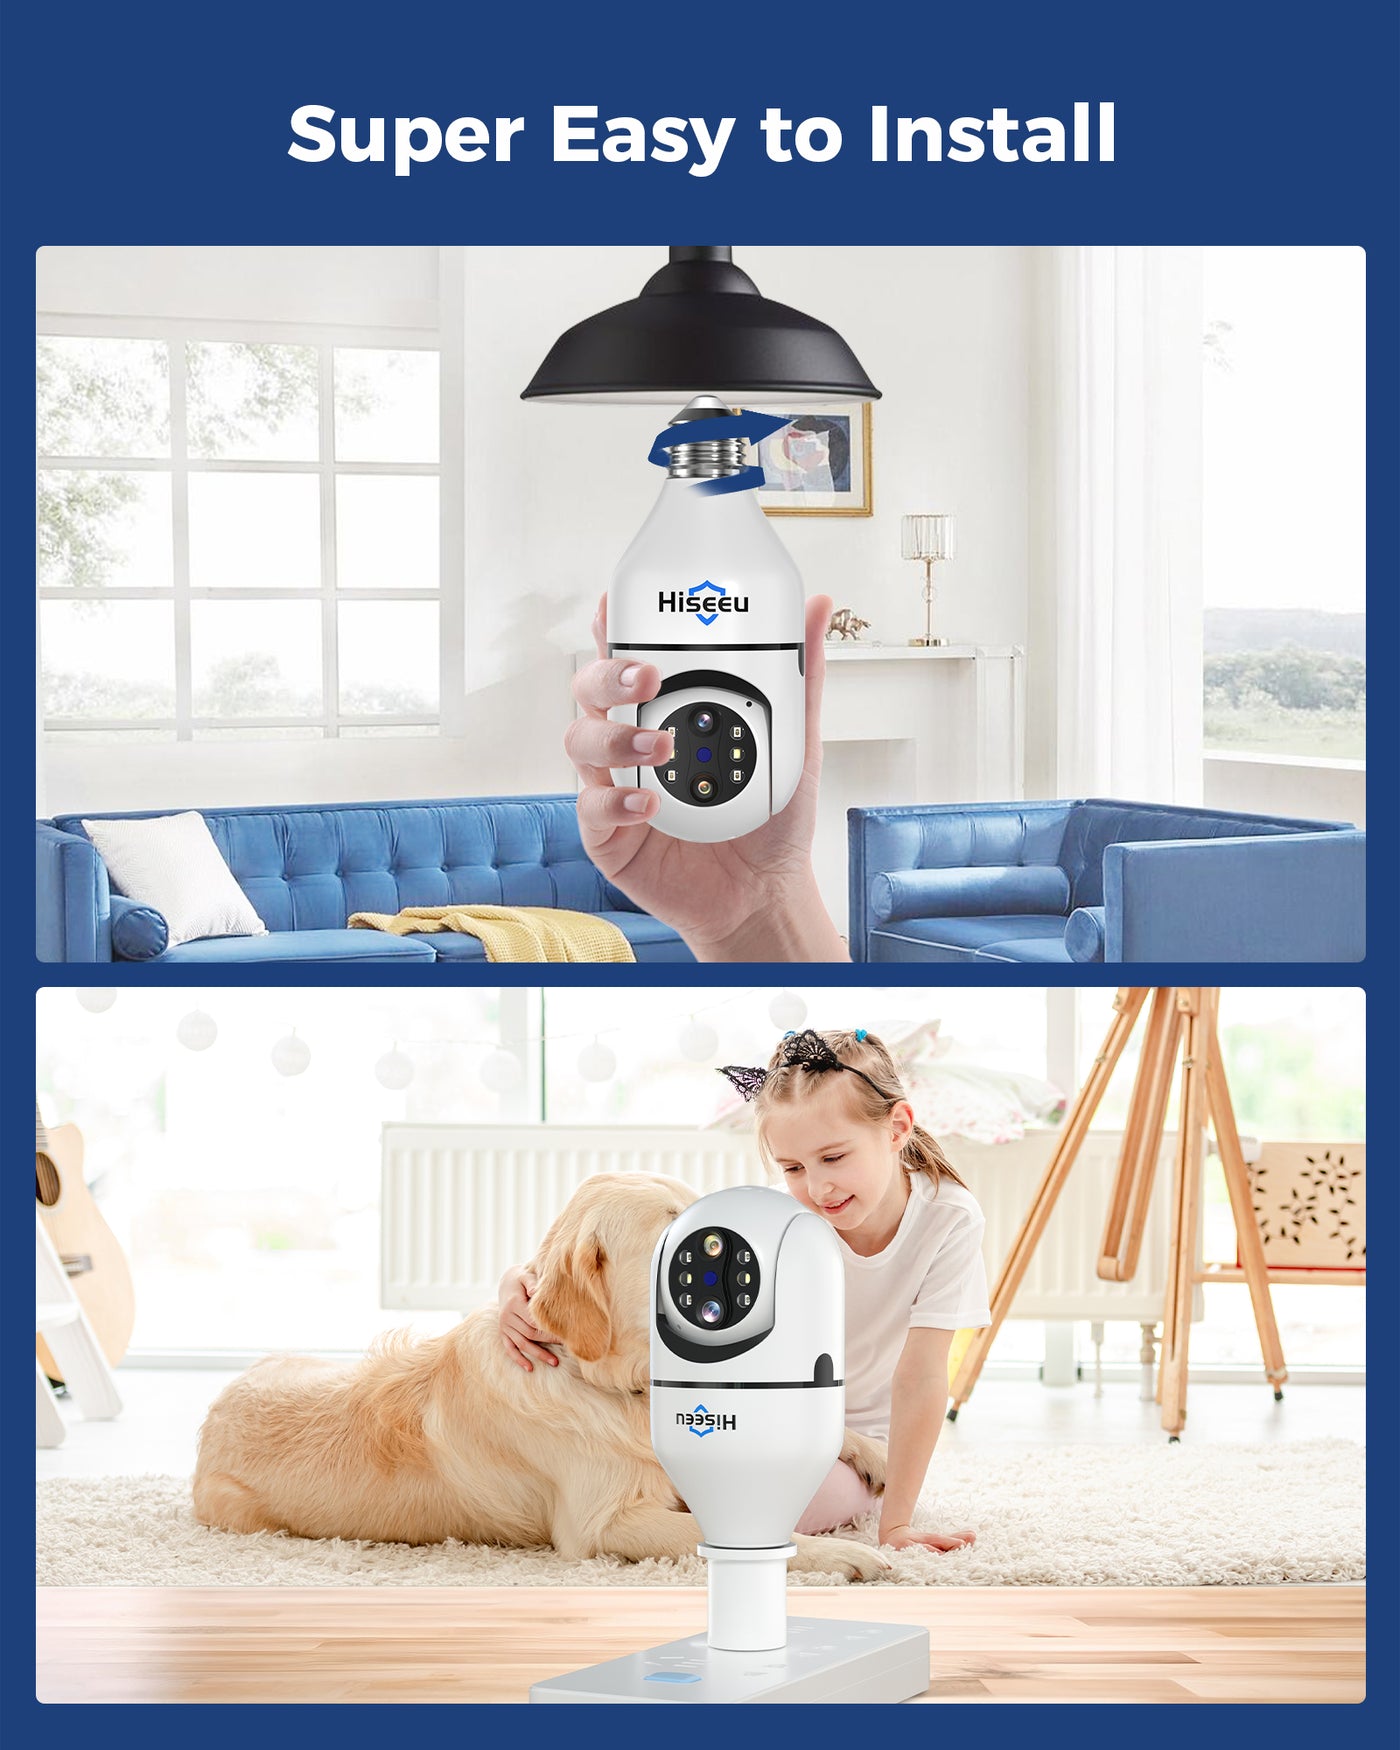 Hiseeu Light Bulb Security Camera Wireless WiFi 5G&2.4GHz,10X Zoom PTZ Light Socket Security Camera for Home, 2-Way-Audio, Auto Tracking & Alarm, 3MP Color Night Vision, SD & Cloud Storage (Dual Lens)